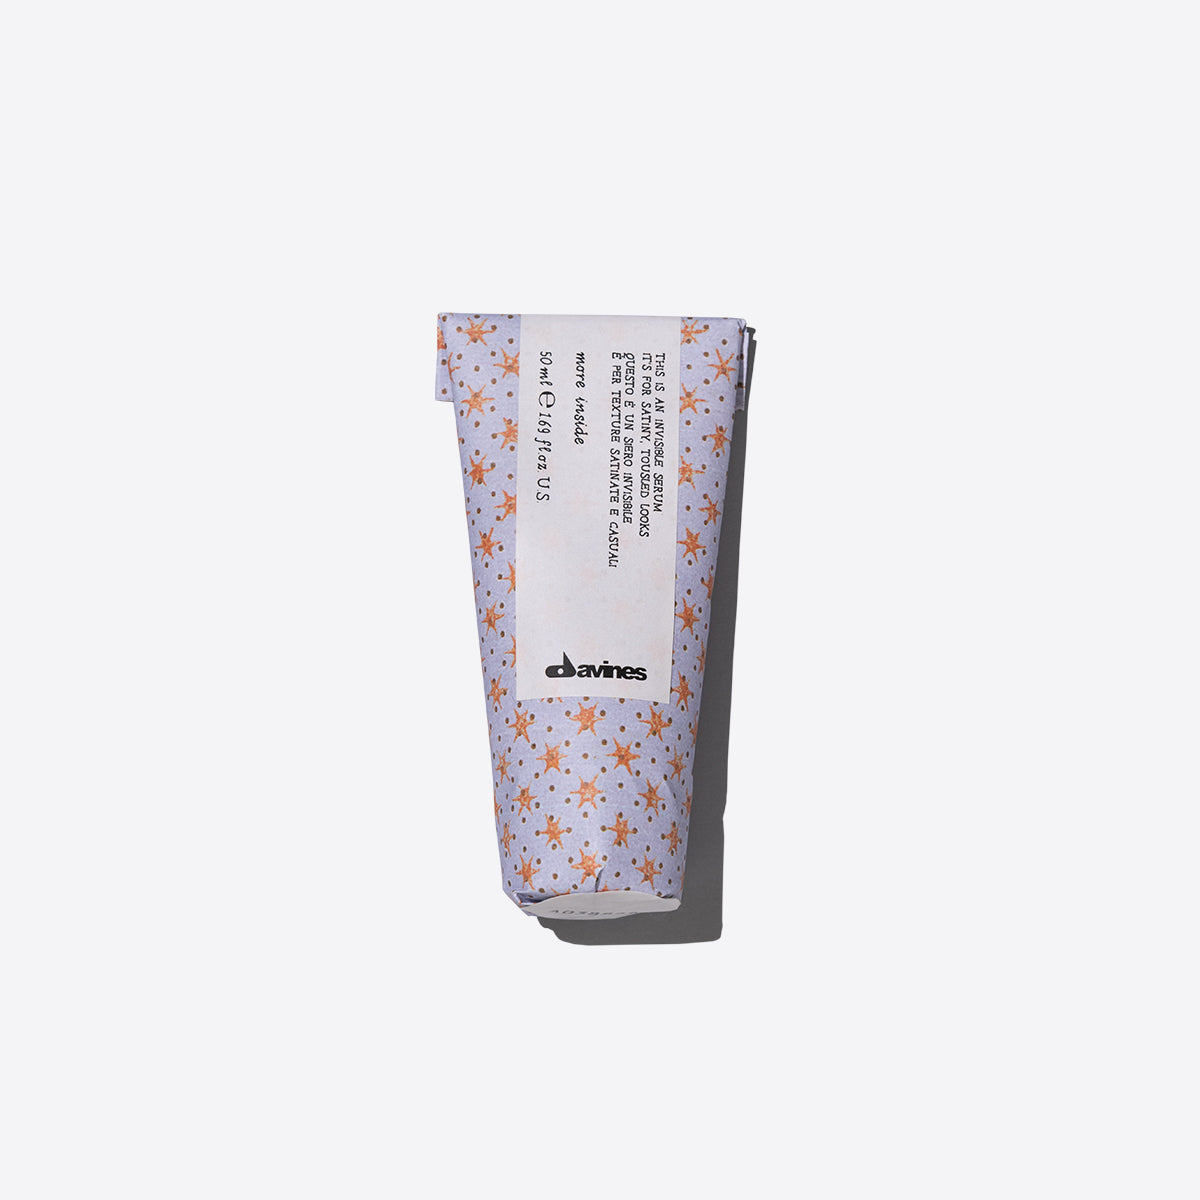 Davines More Inside This is an Invisible Serum 1.69oz